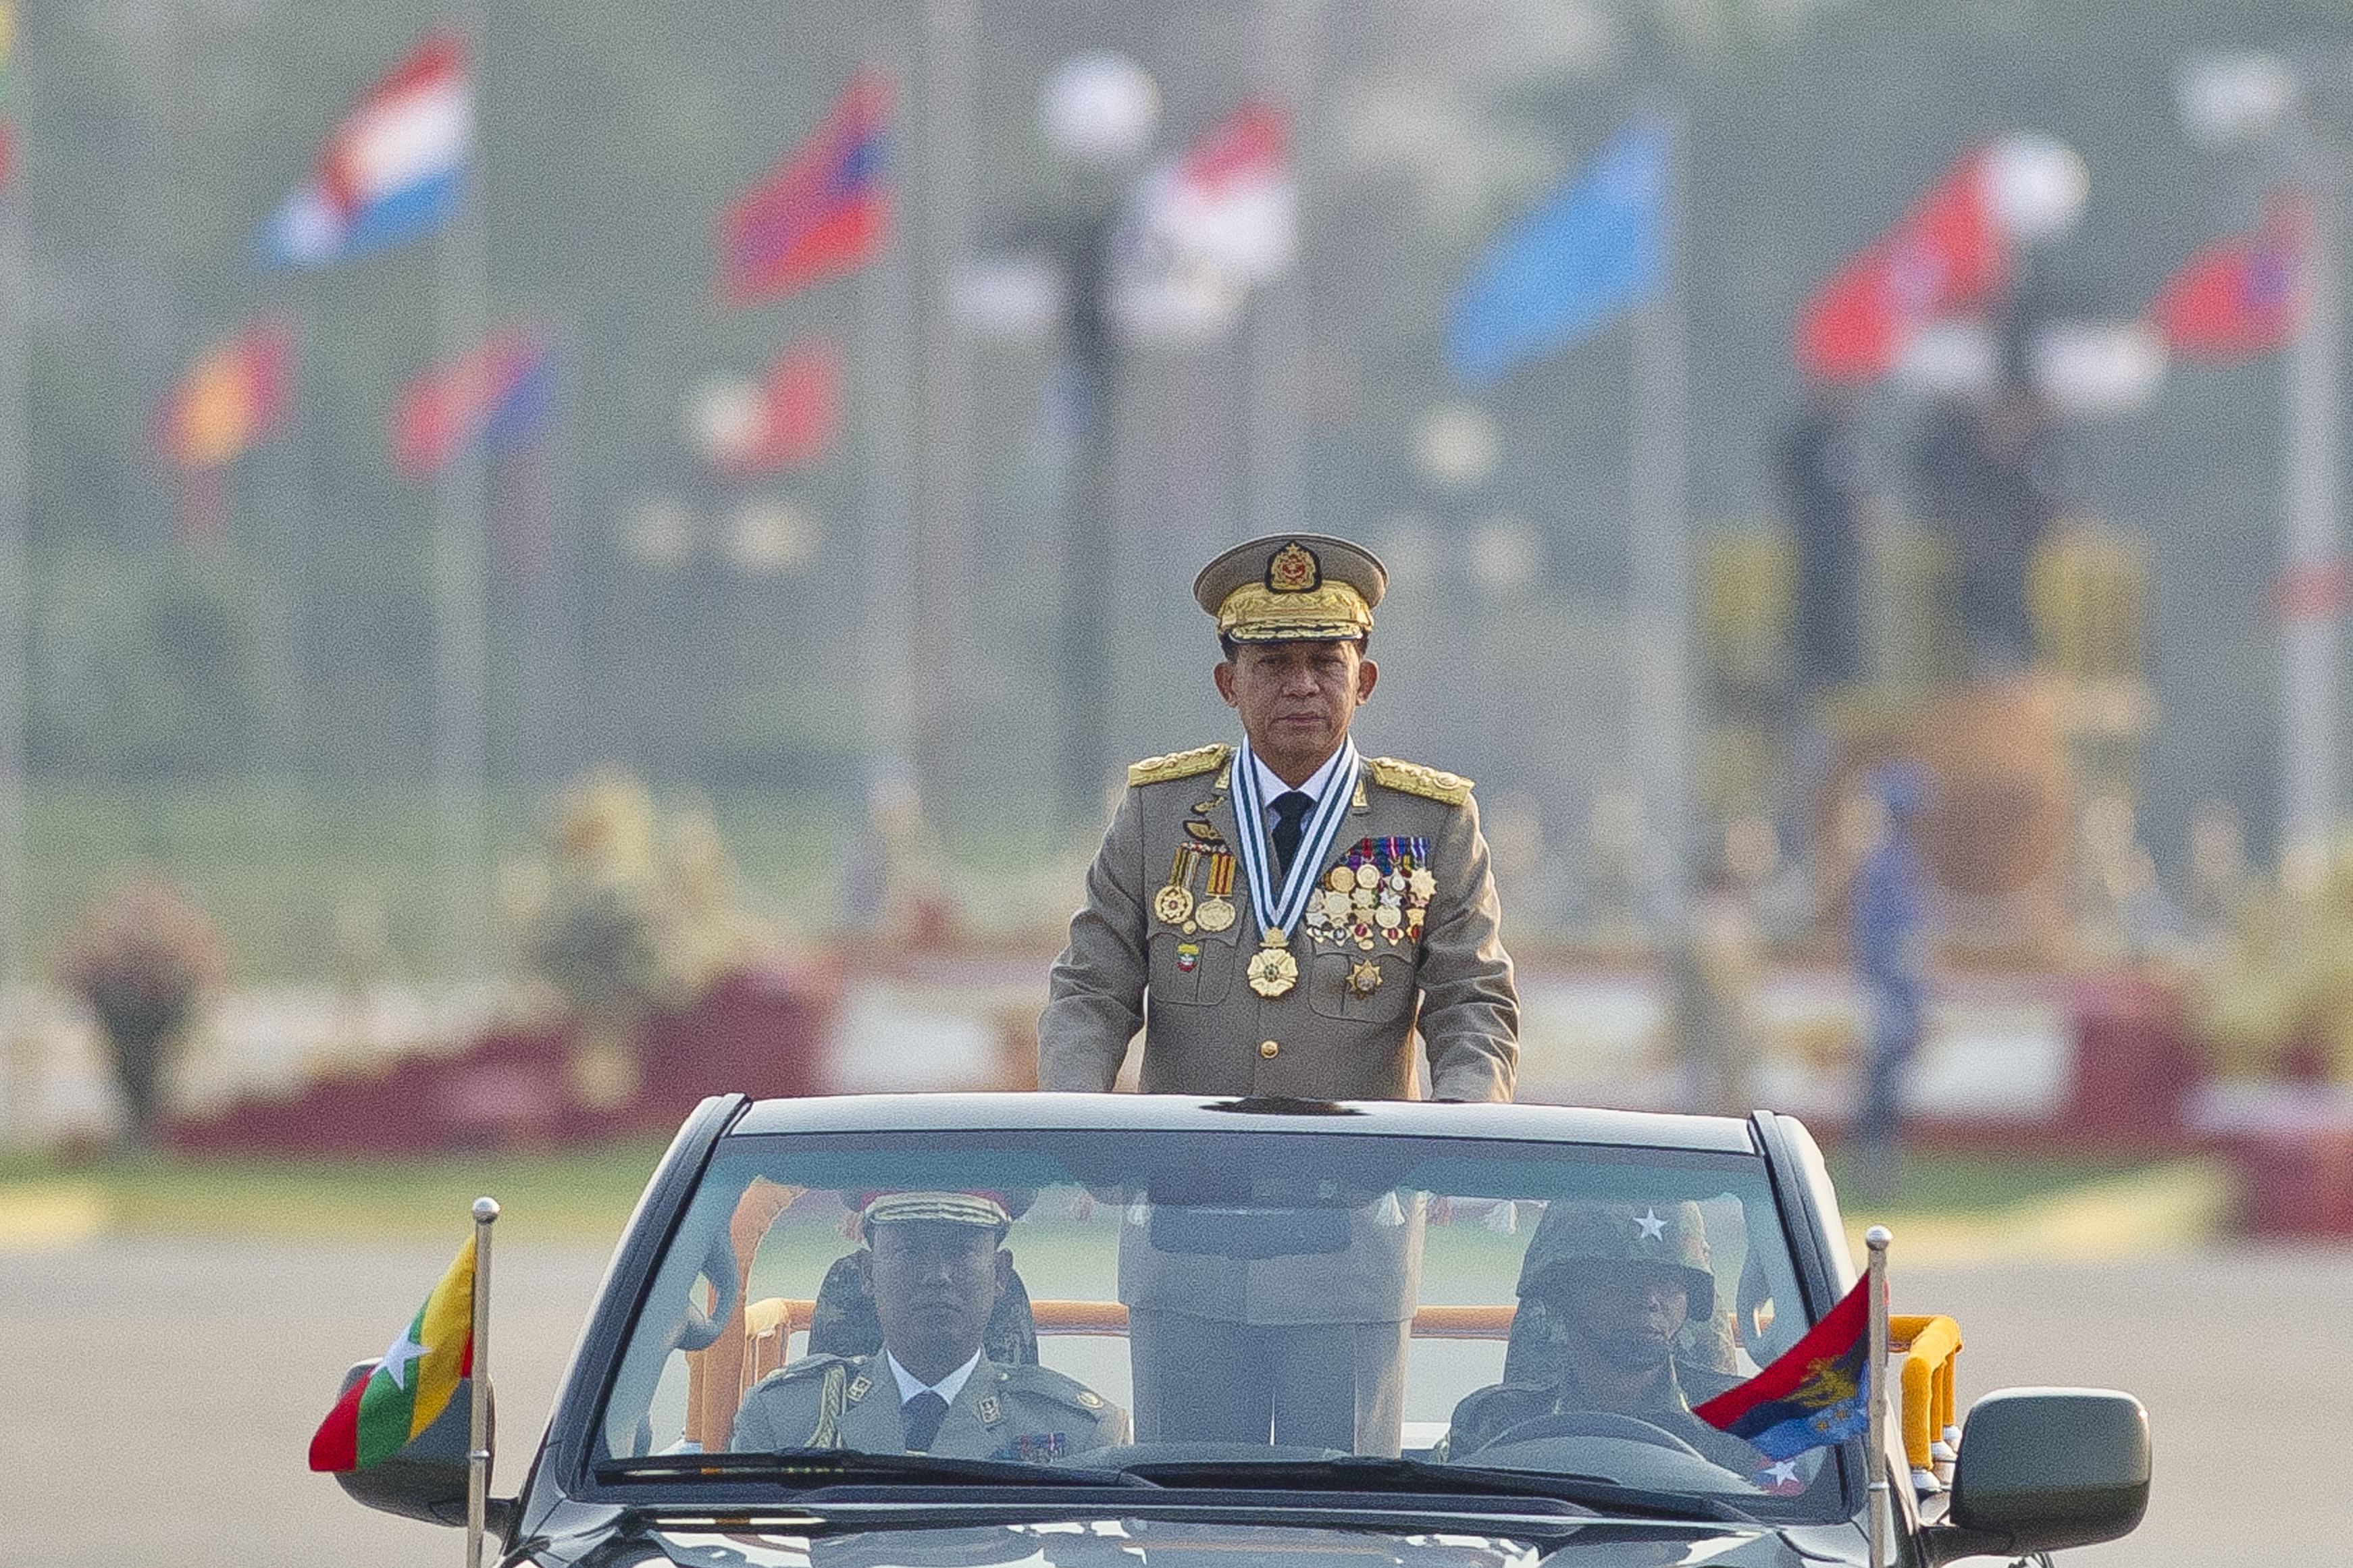 Senior General Min Aung Hlaing, Commander-in-Chief of the Myanmar armed forces, in Myanmar's capital Naypyidaw on March 27, 2016. (Ye Aung Thu—AFP/Getty Images)